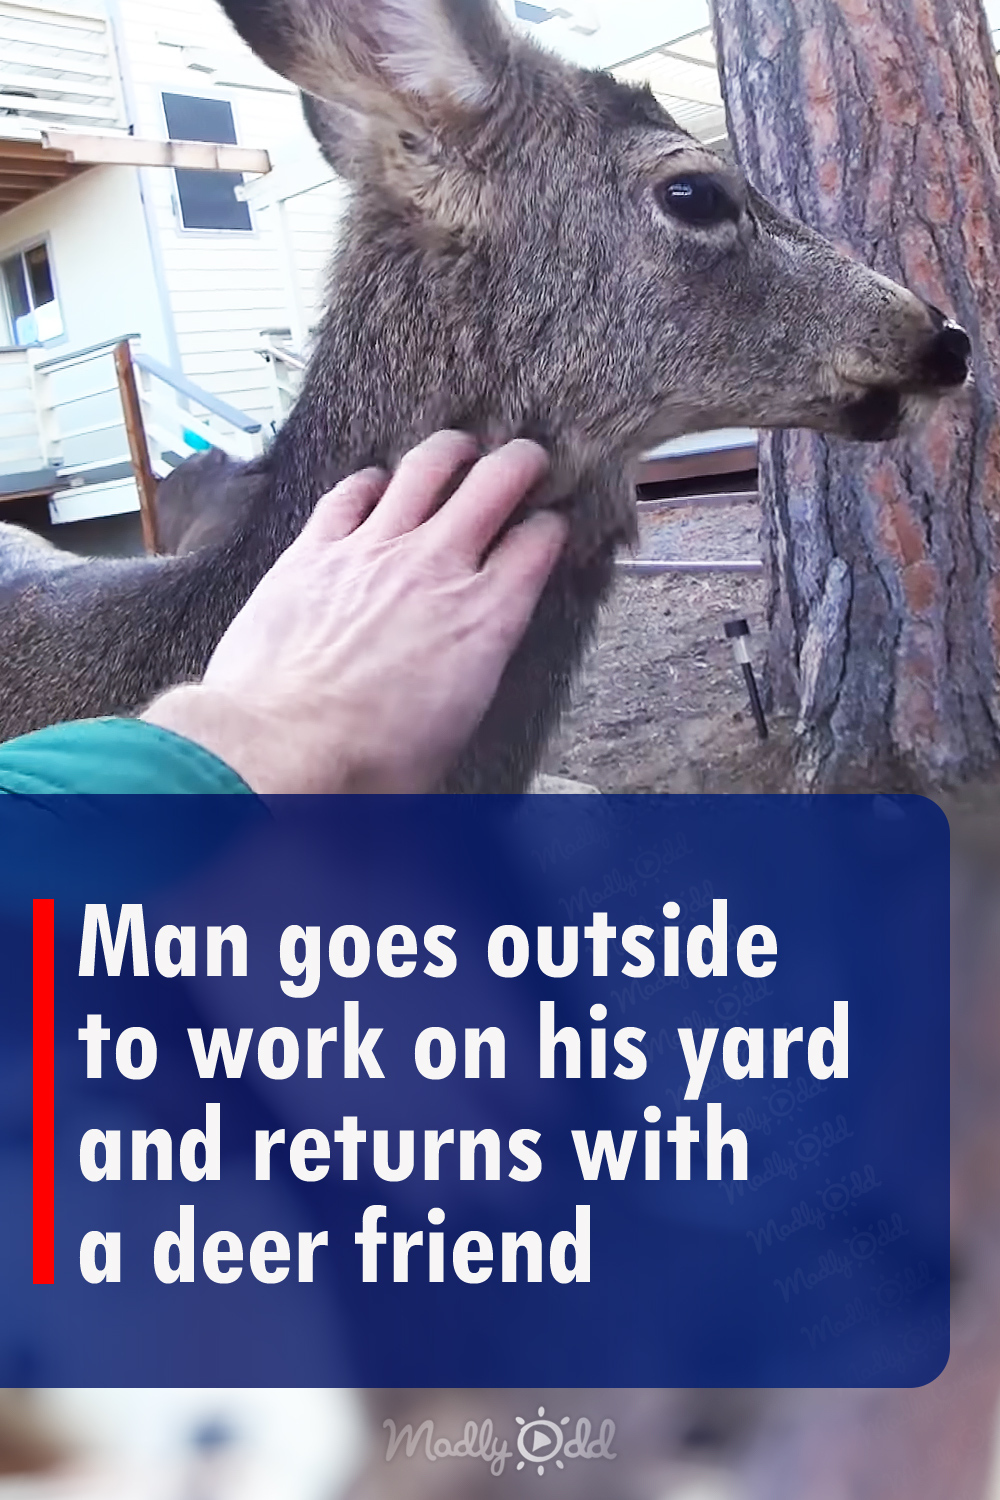 Man goes outside to work on his yard and returns with a deer friend